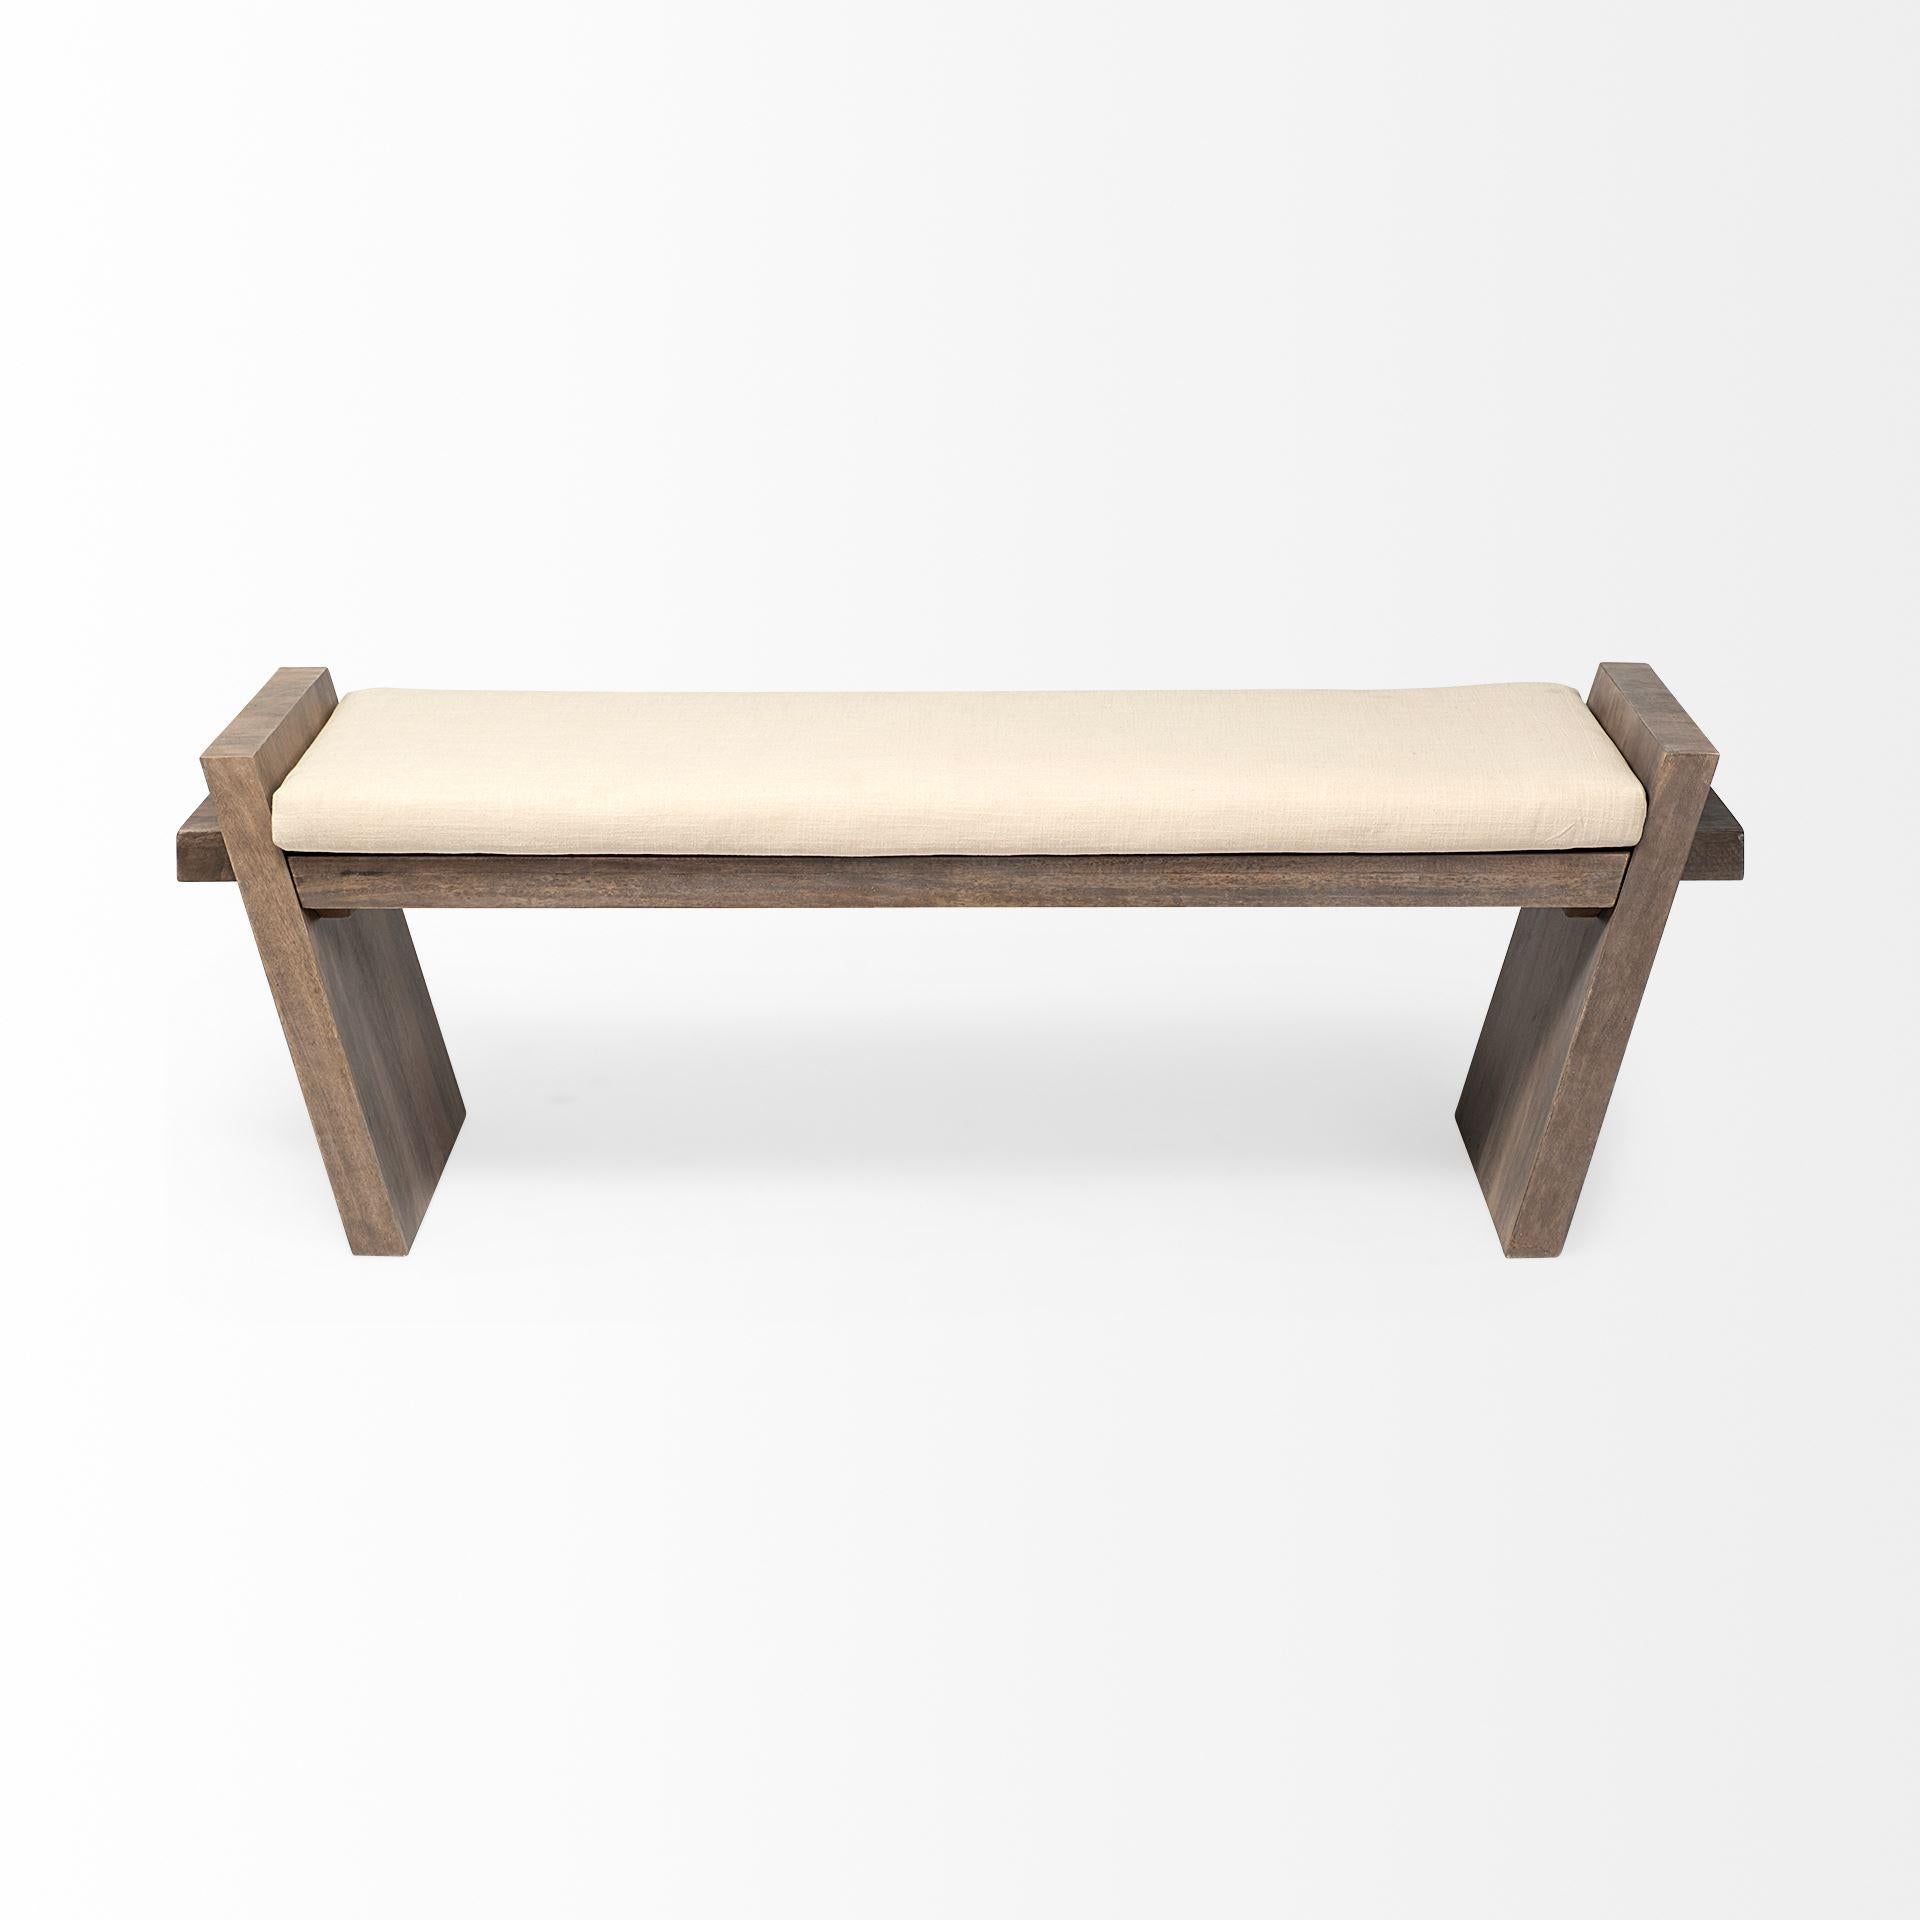 Rectangular Mango Wood Natural Brown Polished with Upholstered Cream Seat Entryway Bench